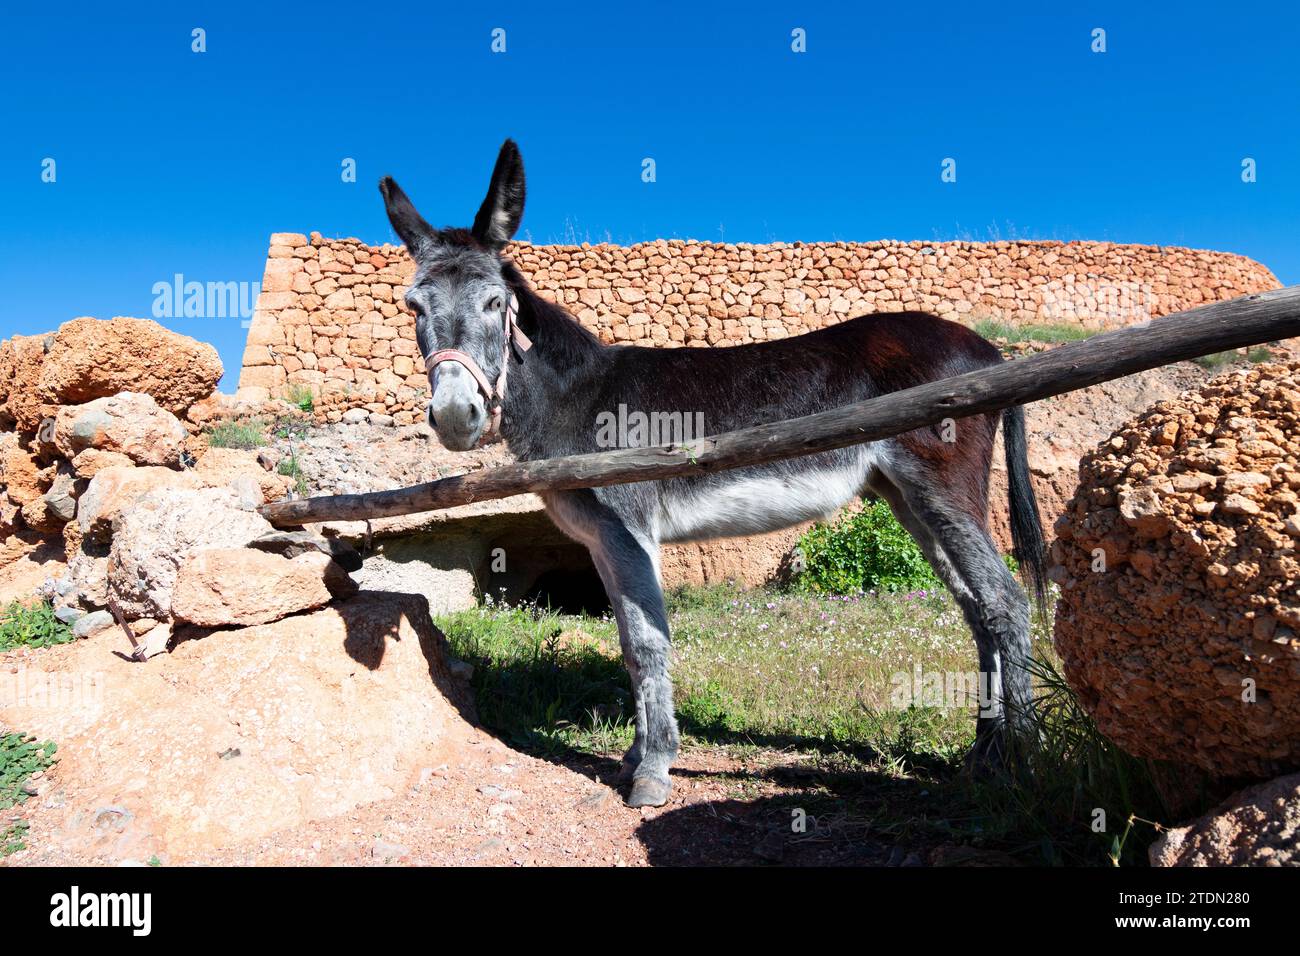 Donkey, a noble domestic animal used for tillage in the fields. rural environment Stock Photo